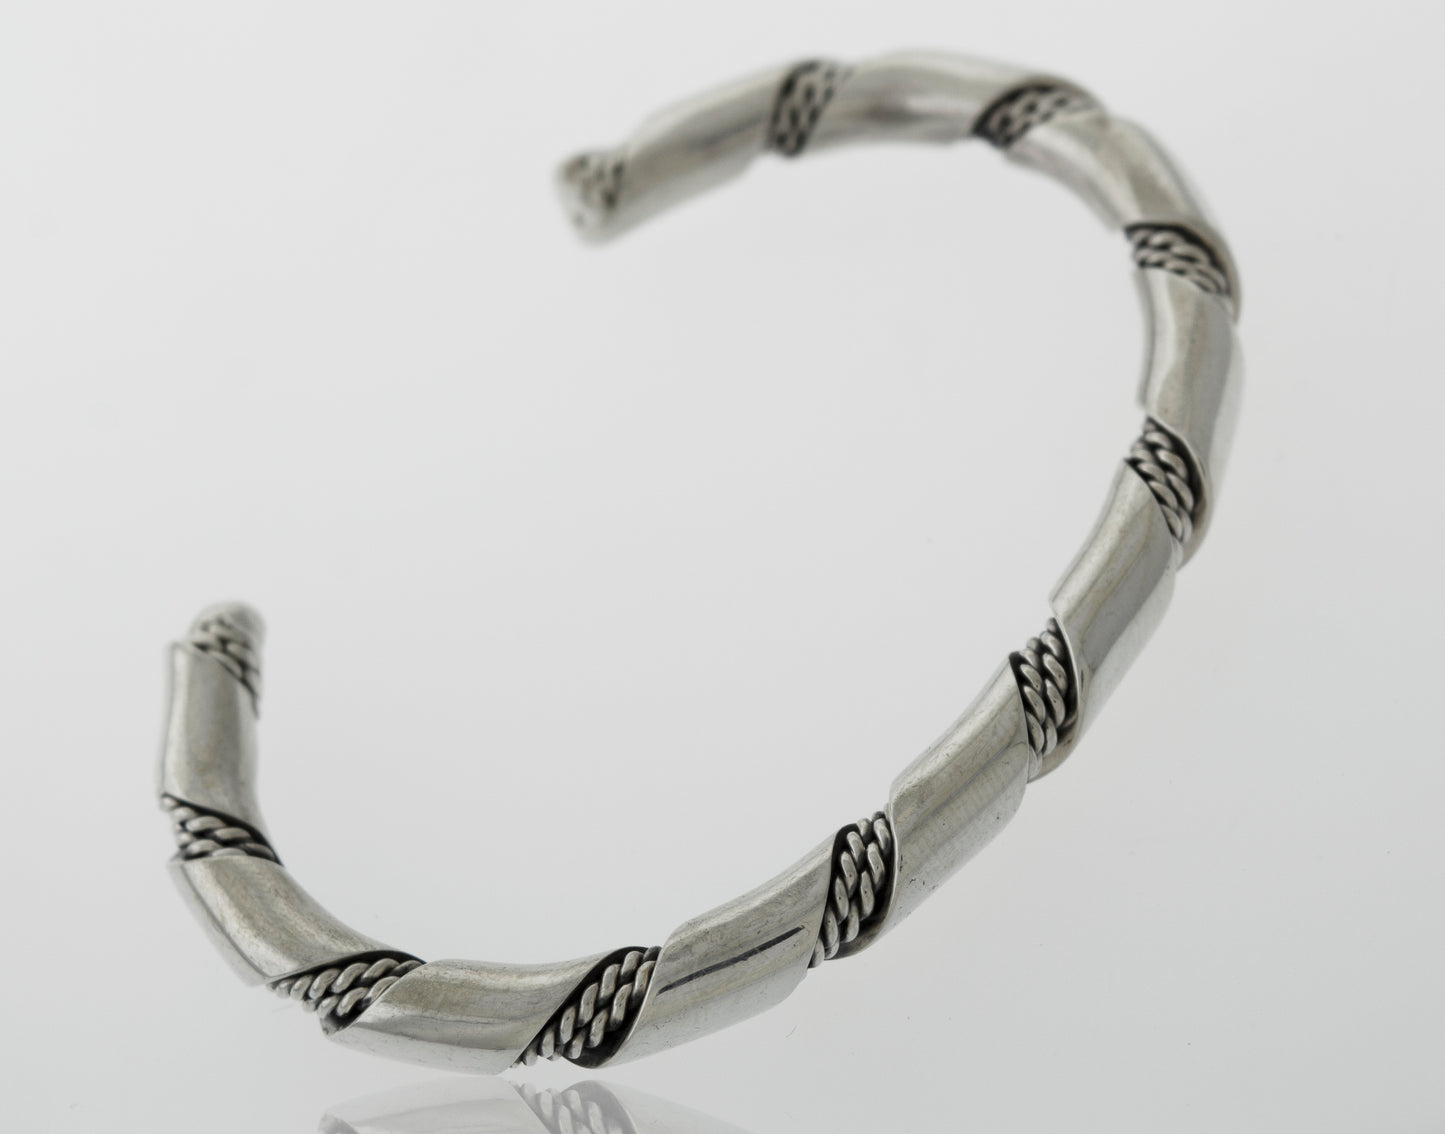 An elegant statement piece, this Native American Handmade Thick Silver Twist Cuff bracelet with a braided design is made from .925 Sterling Silver.